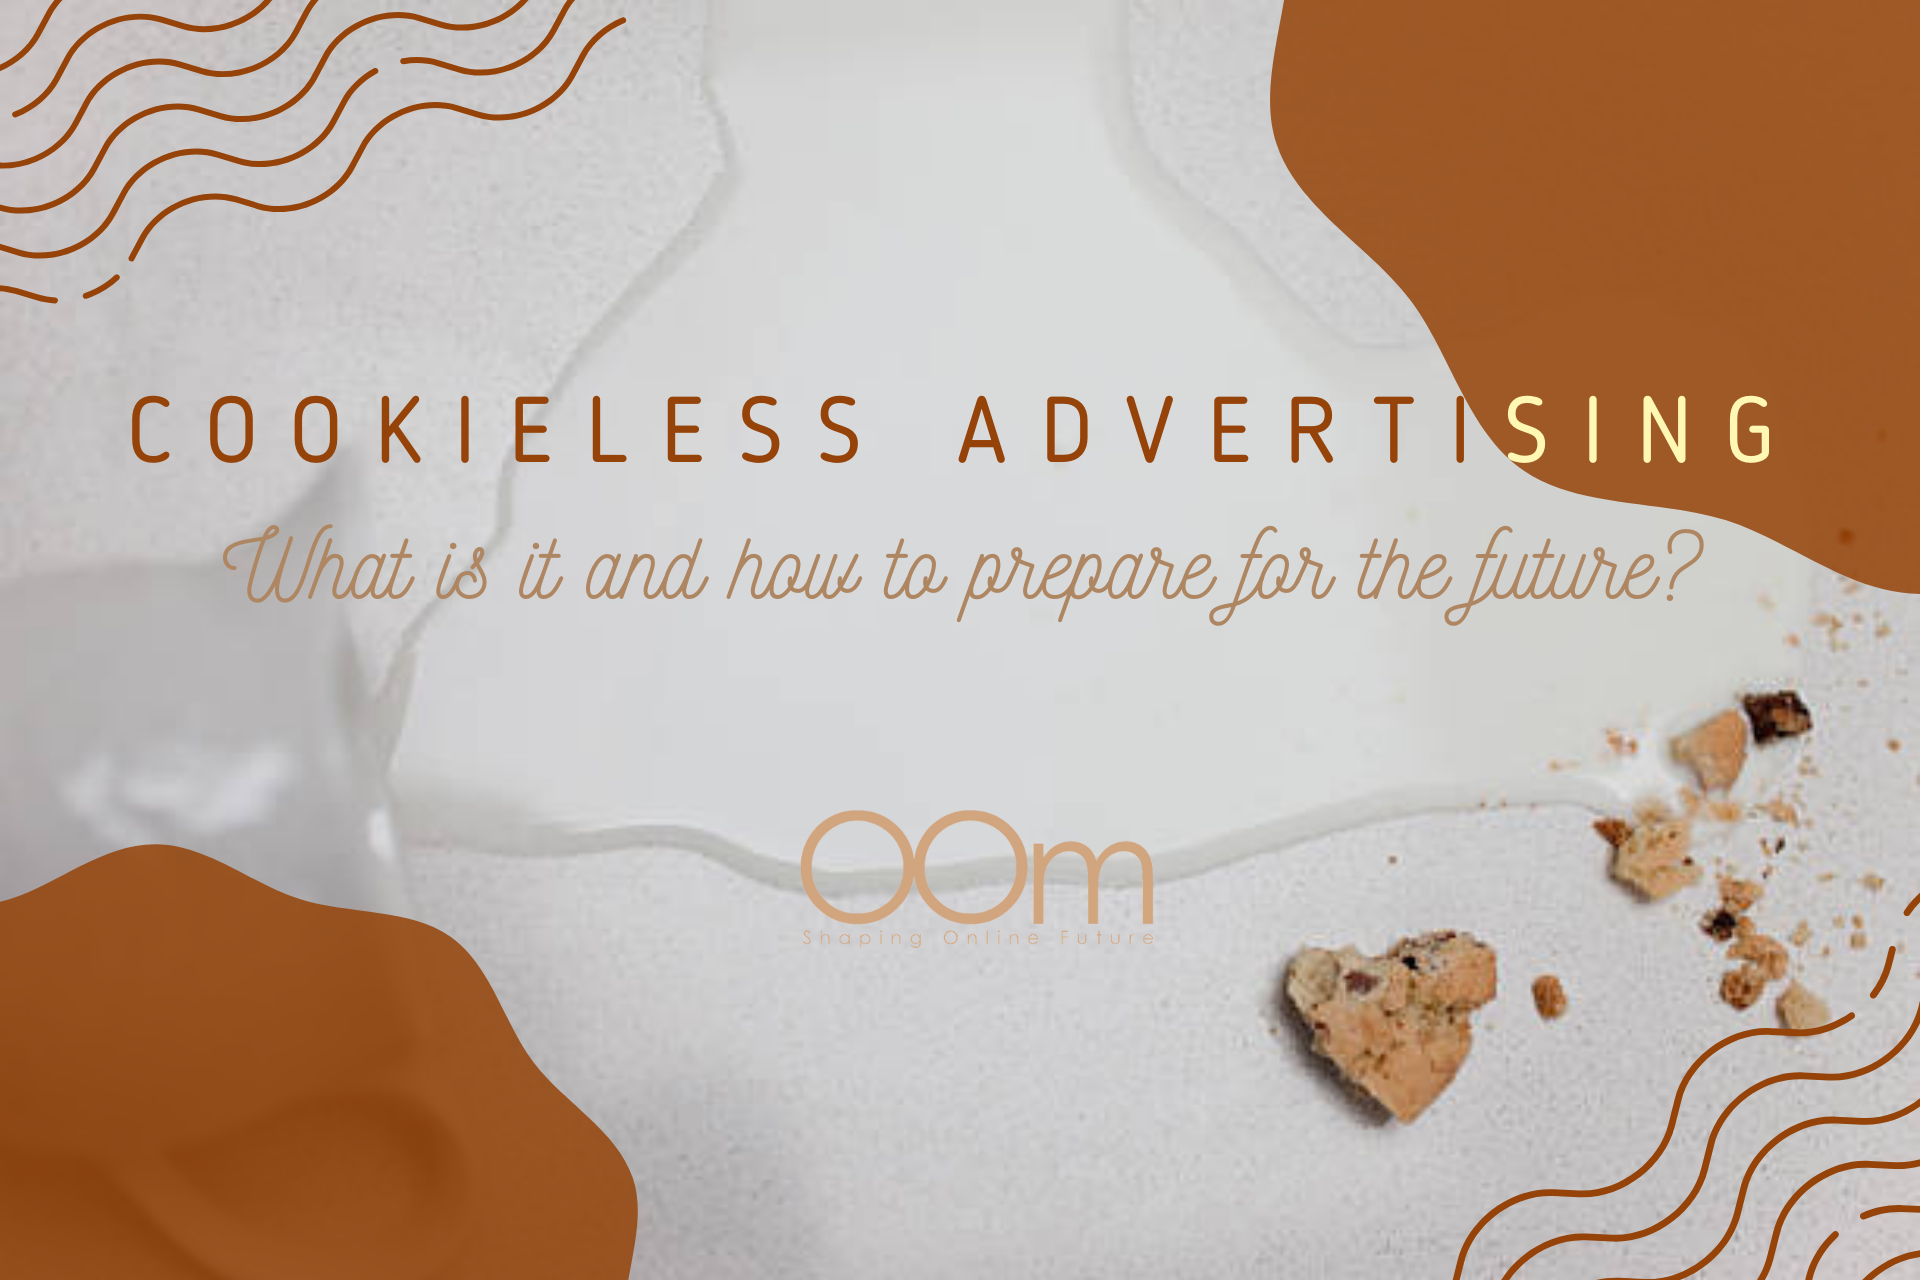 Cookieless Advertising What Is It and How to Prepare for a Cookieless Future